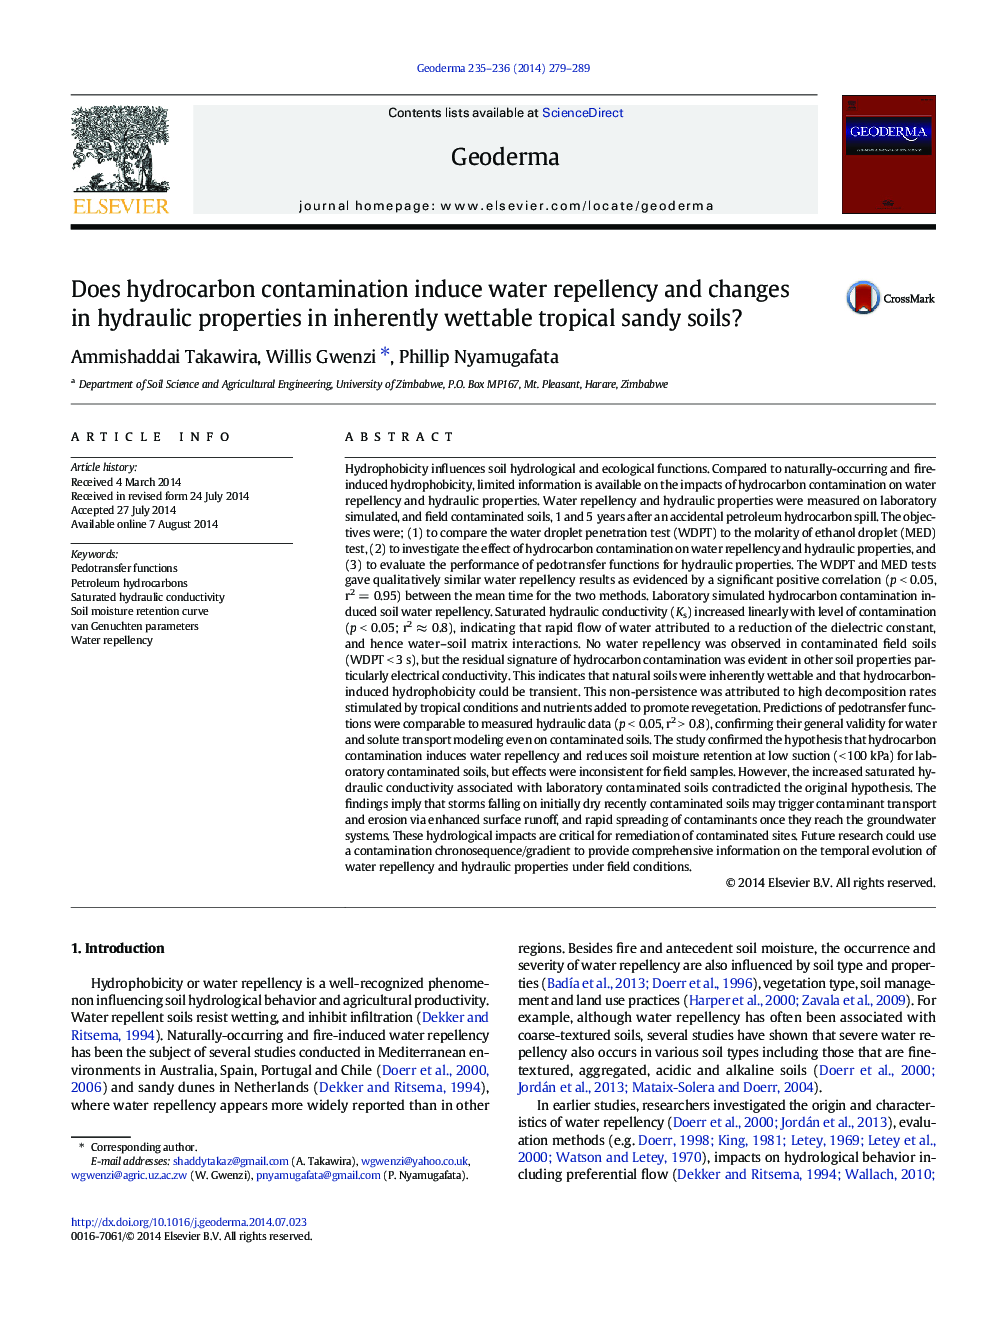 Does hydrocarbon contamination induce water repellency and changes in hydraulic properties in inherently wettable tropical sandy soils?